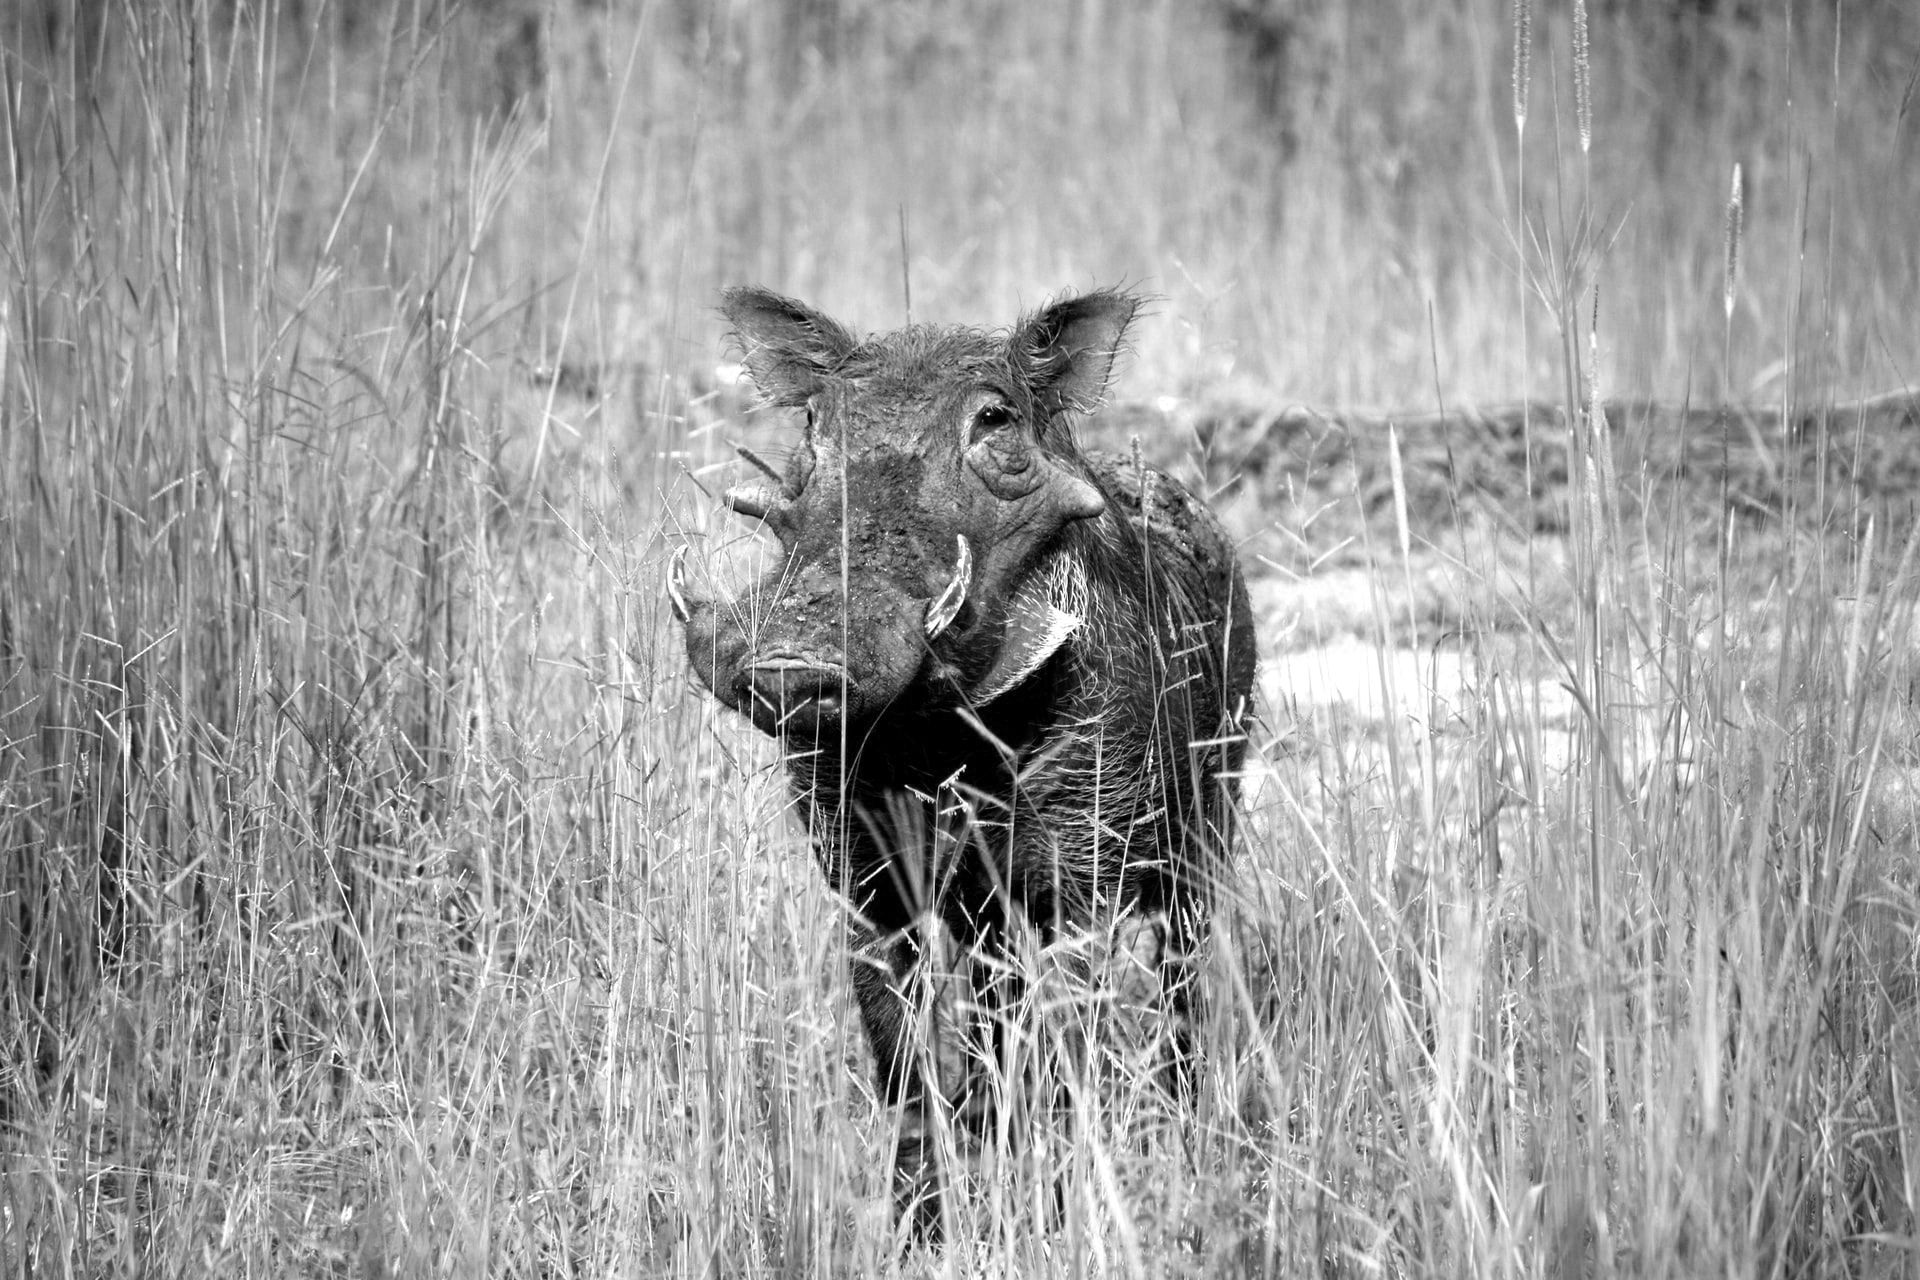 A warthog in South Luangwa National Park, Zambia